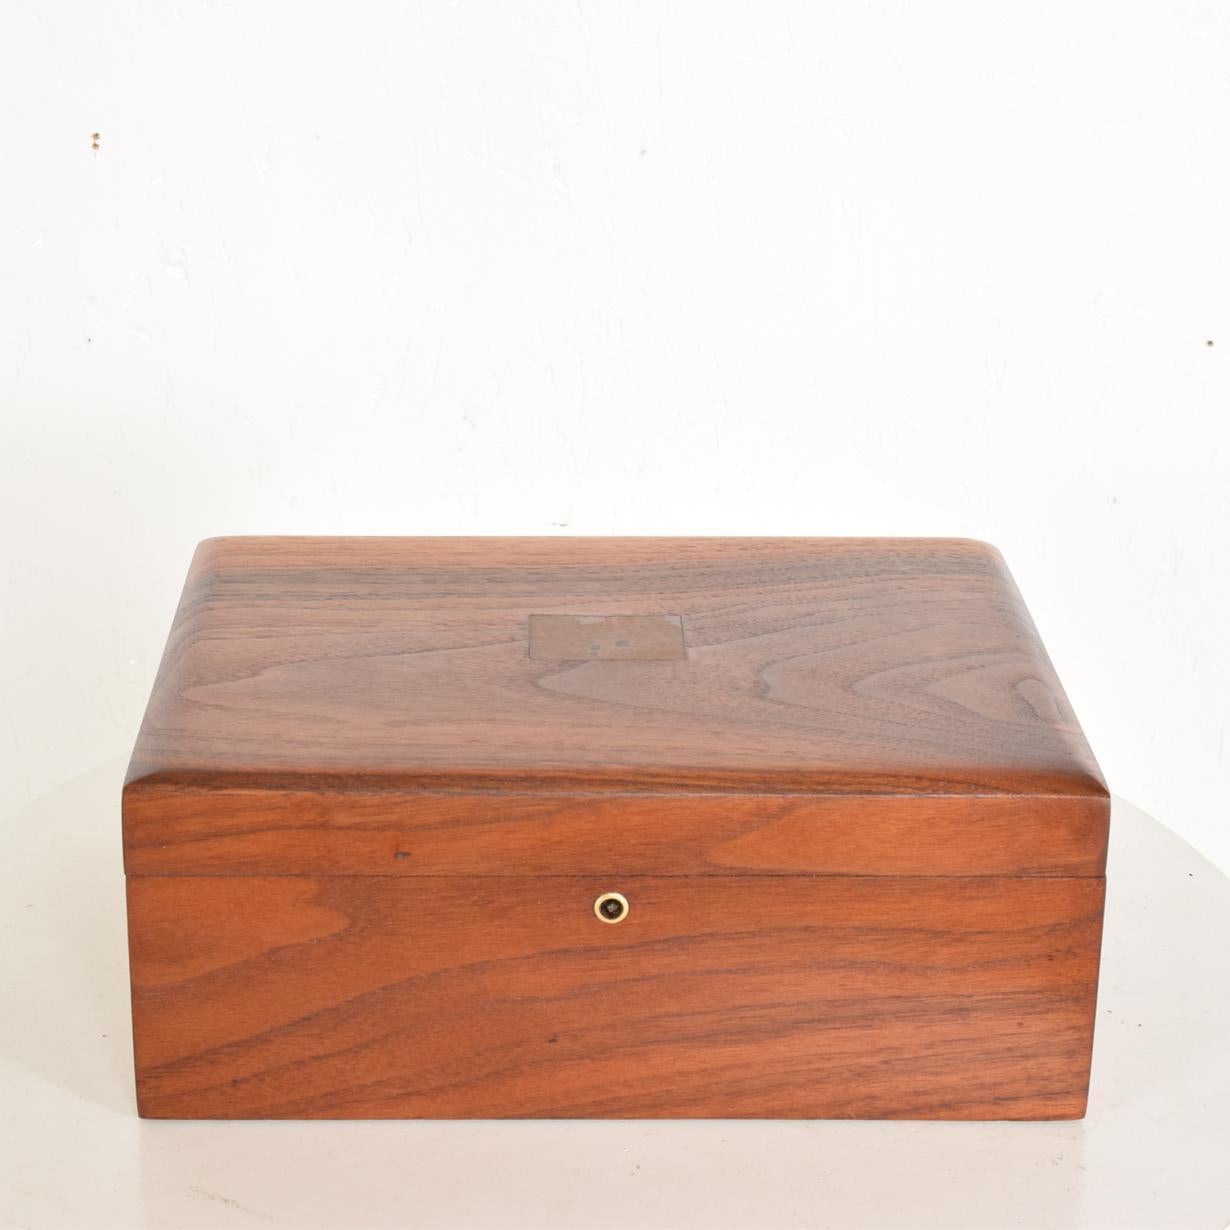 For your consideration, a Mid-Century Modern walnut box with copper ornamentation. 

Unmarked. Solid walnut wood with copper inlay on top. White acrylic in the interior. 

Dimensions: 11 1/4